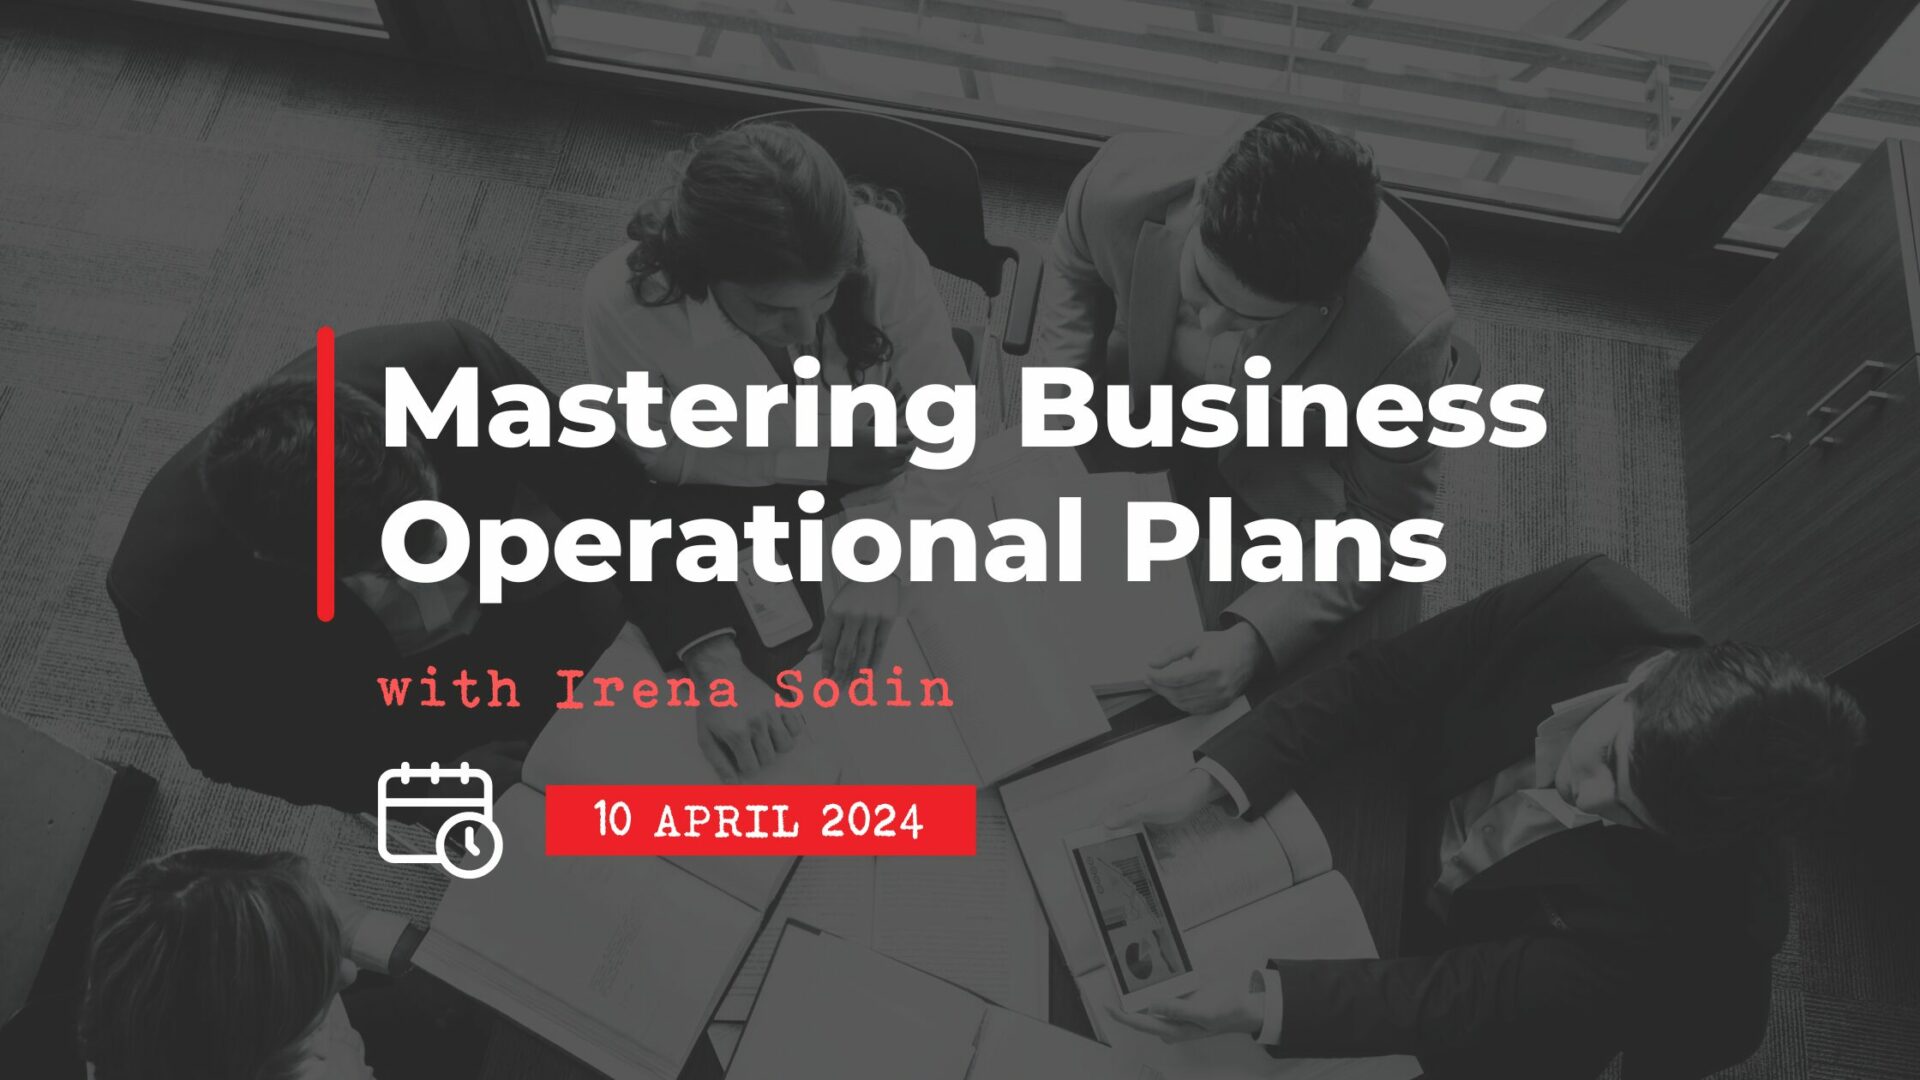 10 April: Mastering Business Operational Plans with Irena Sodin